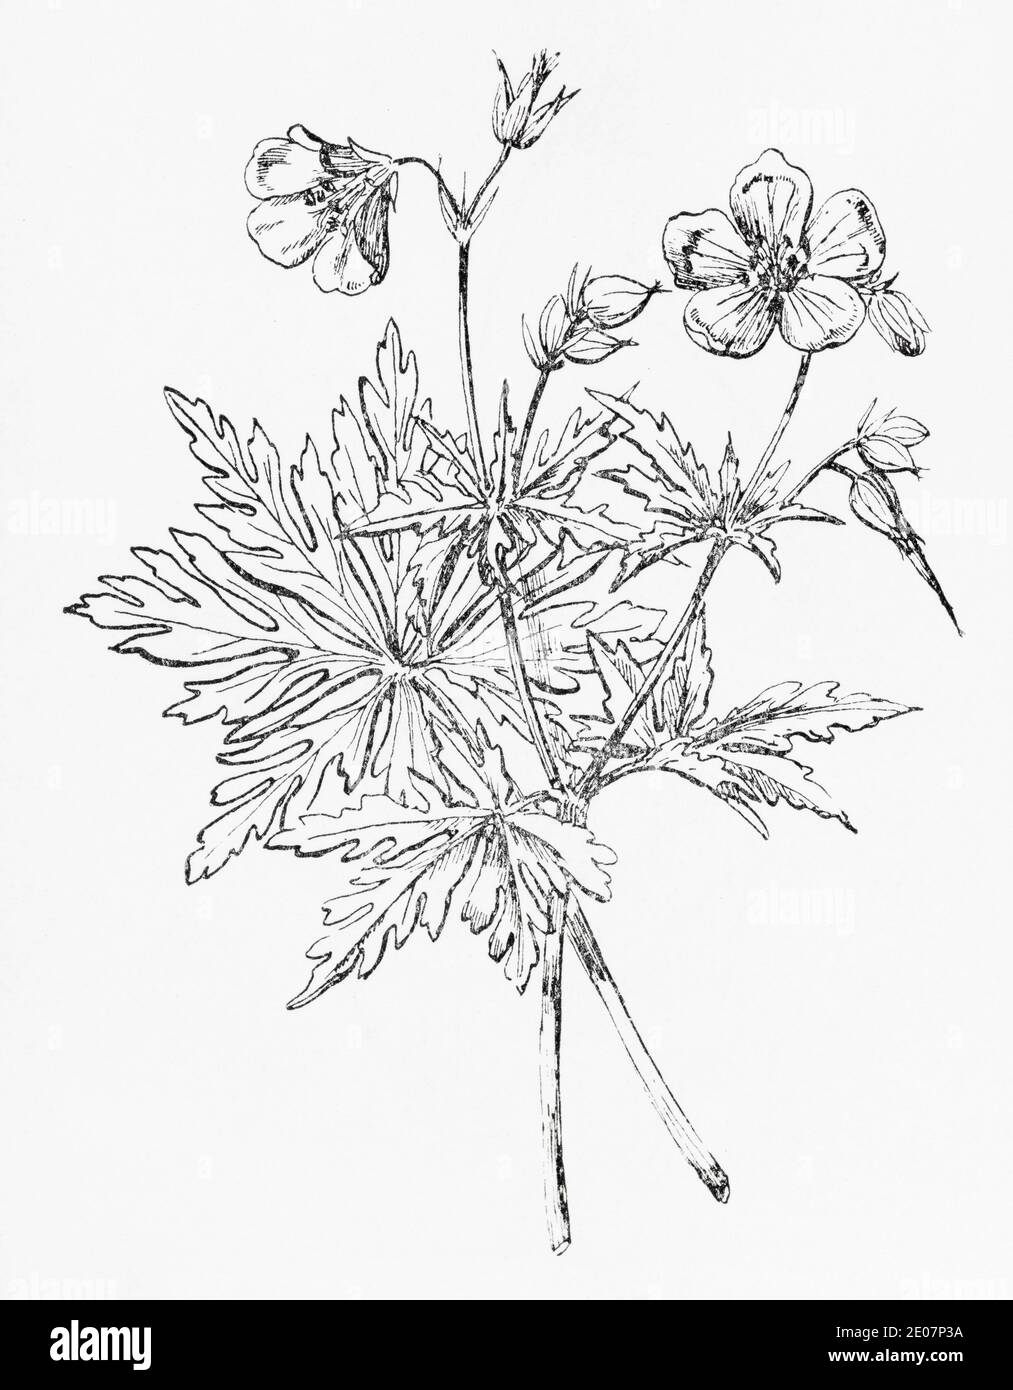 Old botanical illustration engraving of Meadow Cranesbill / Geranium pratense. Traditional medicinal herbal plant. See Notes Stock Photo